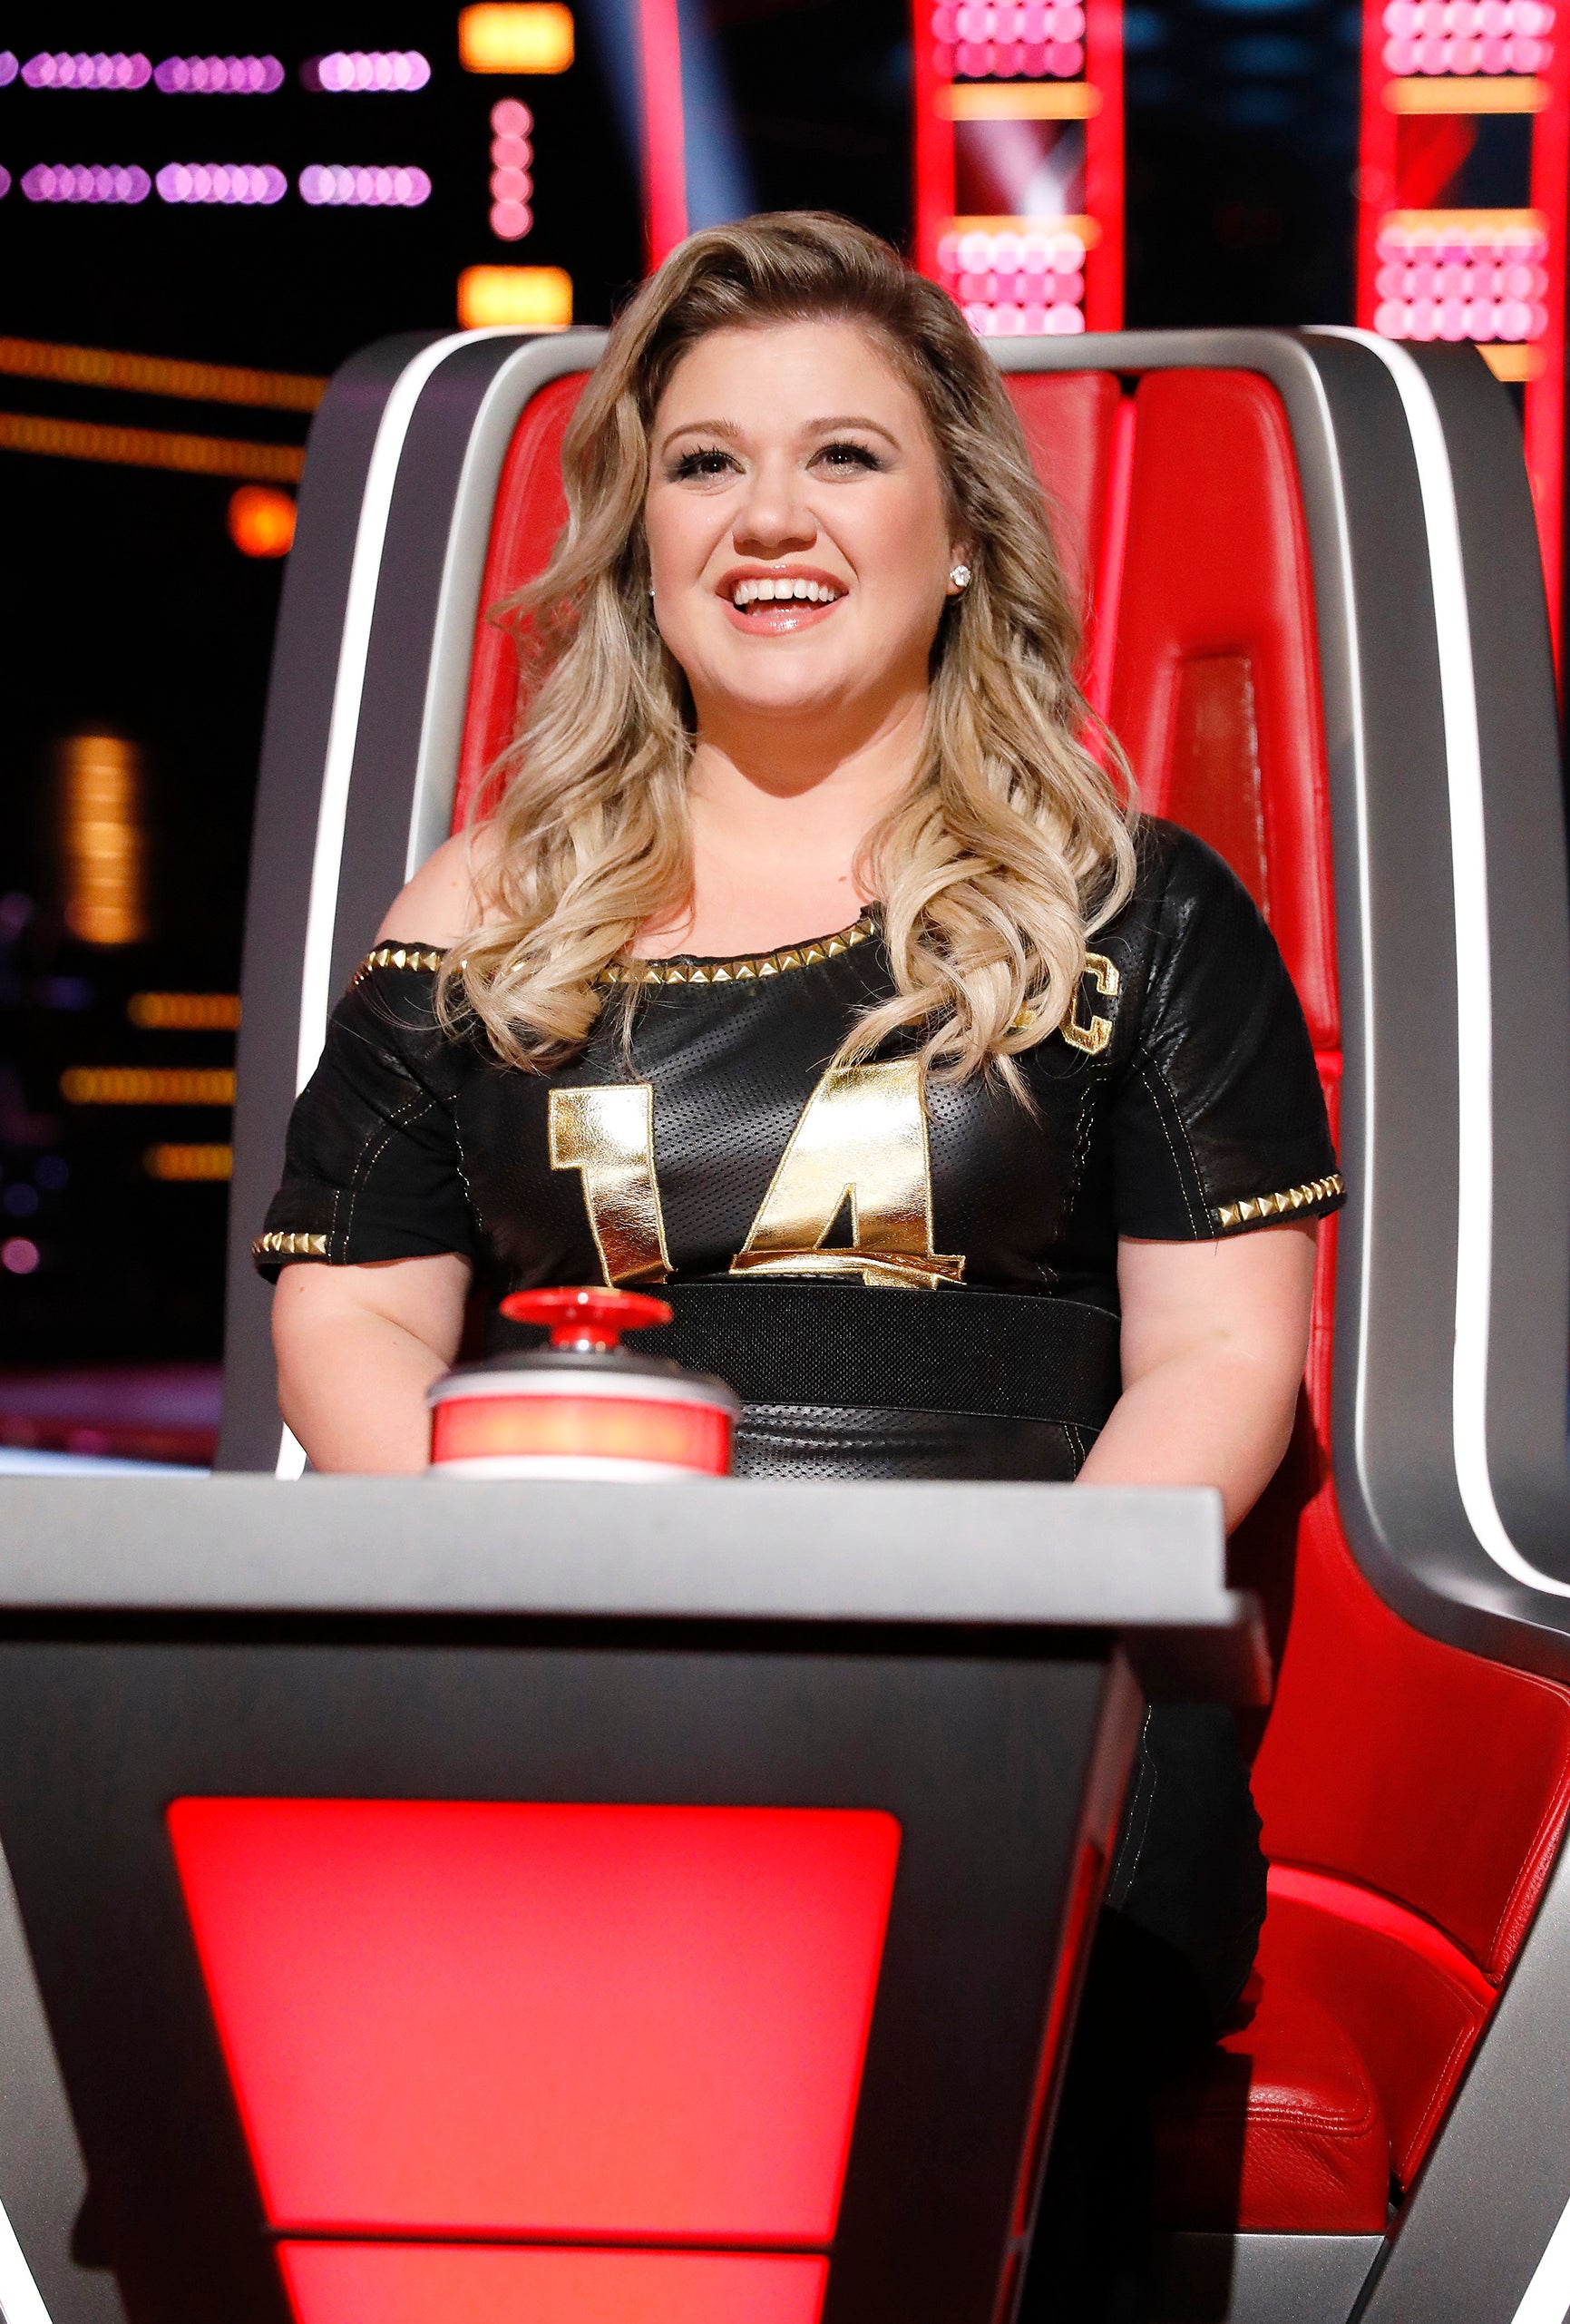 Kelly on The Voice as a judge